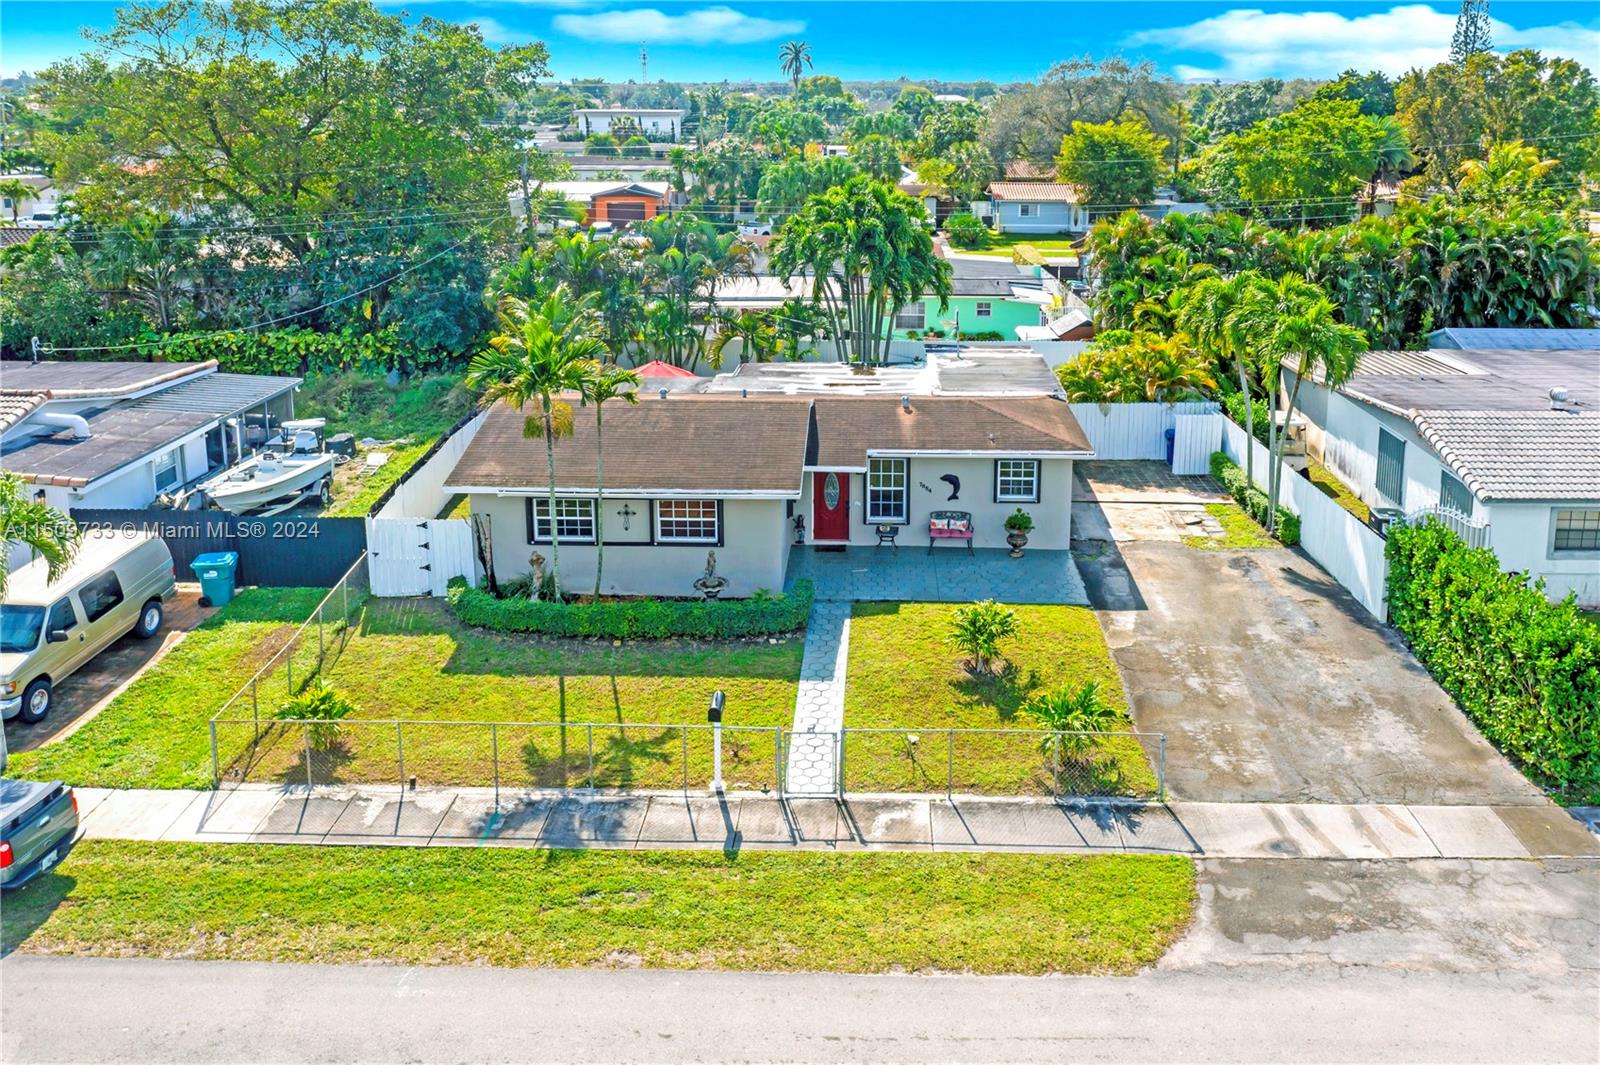 7884 Nw 175th St St, Hialeah, Miami-Dade County, Florida - 4 Bedrooms  
2 Bathrooms - 